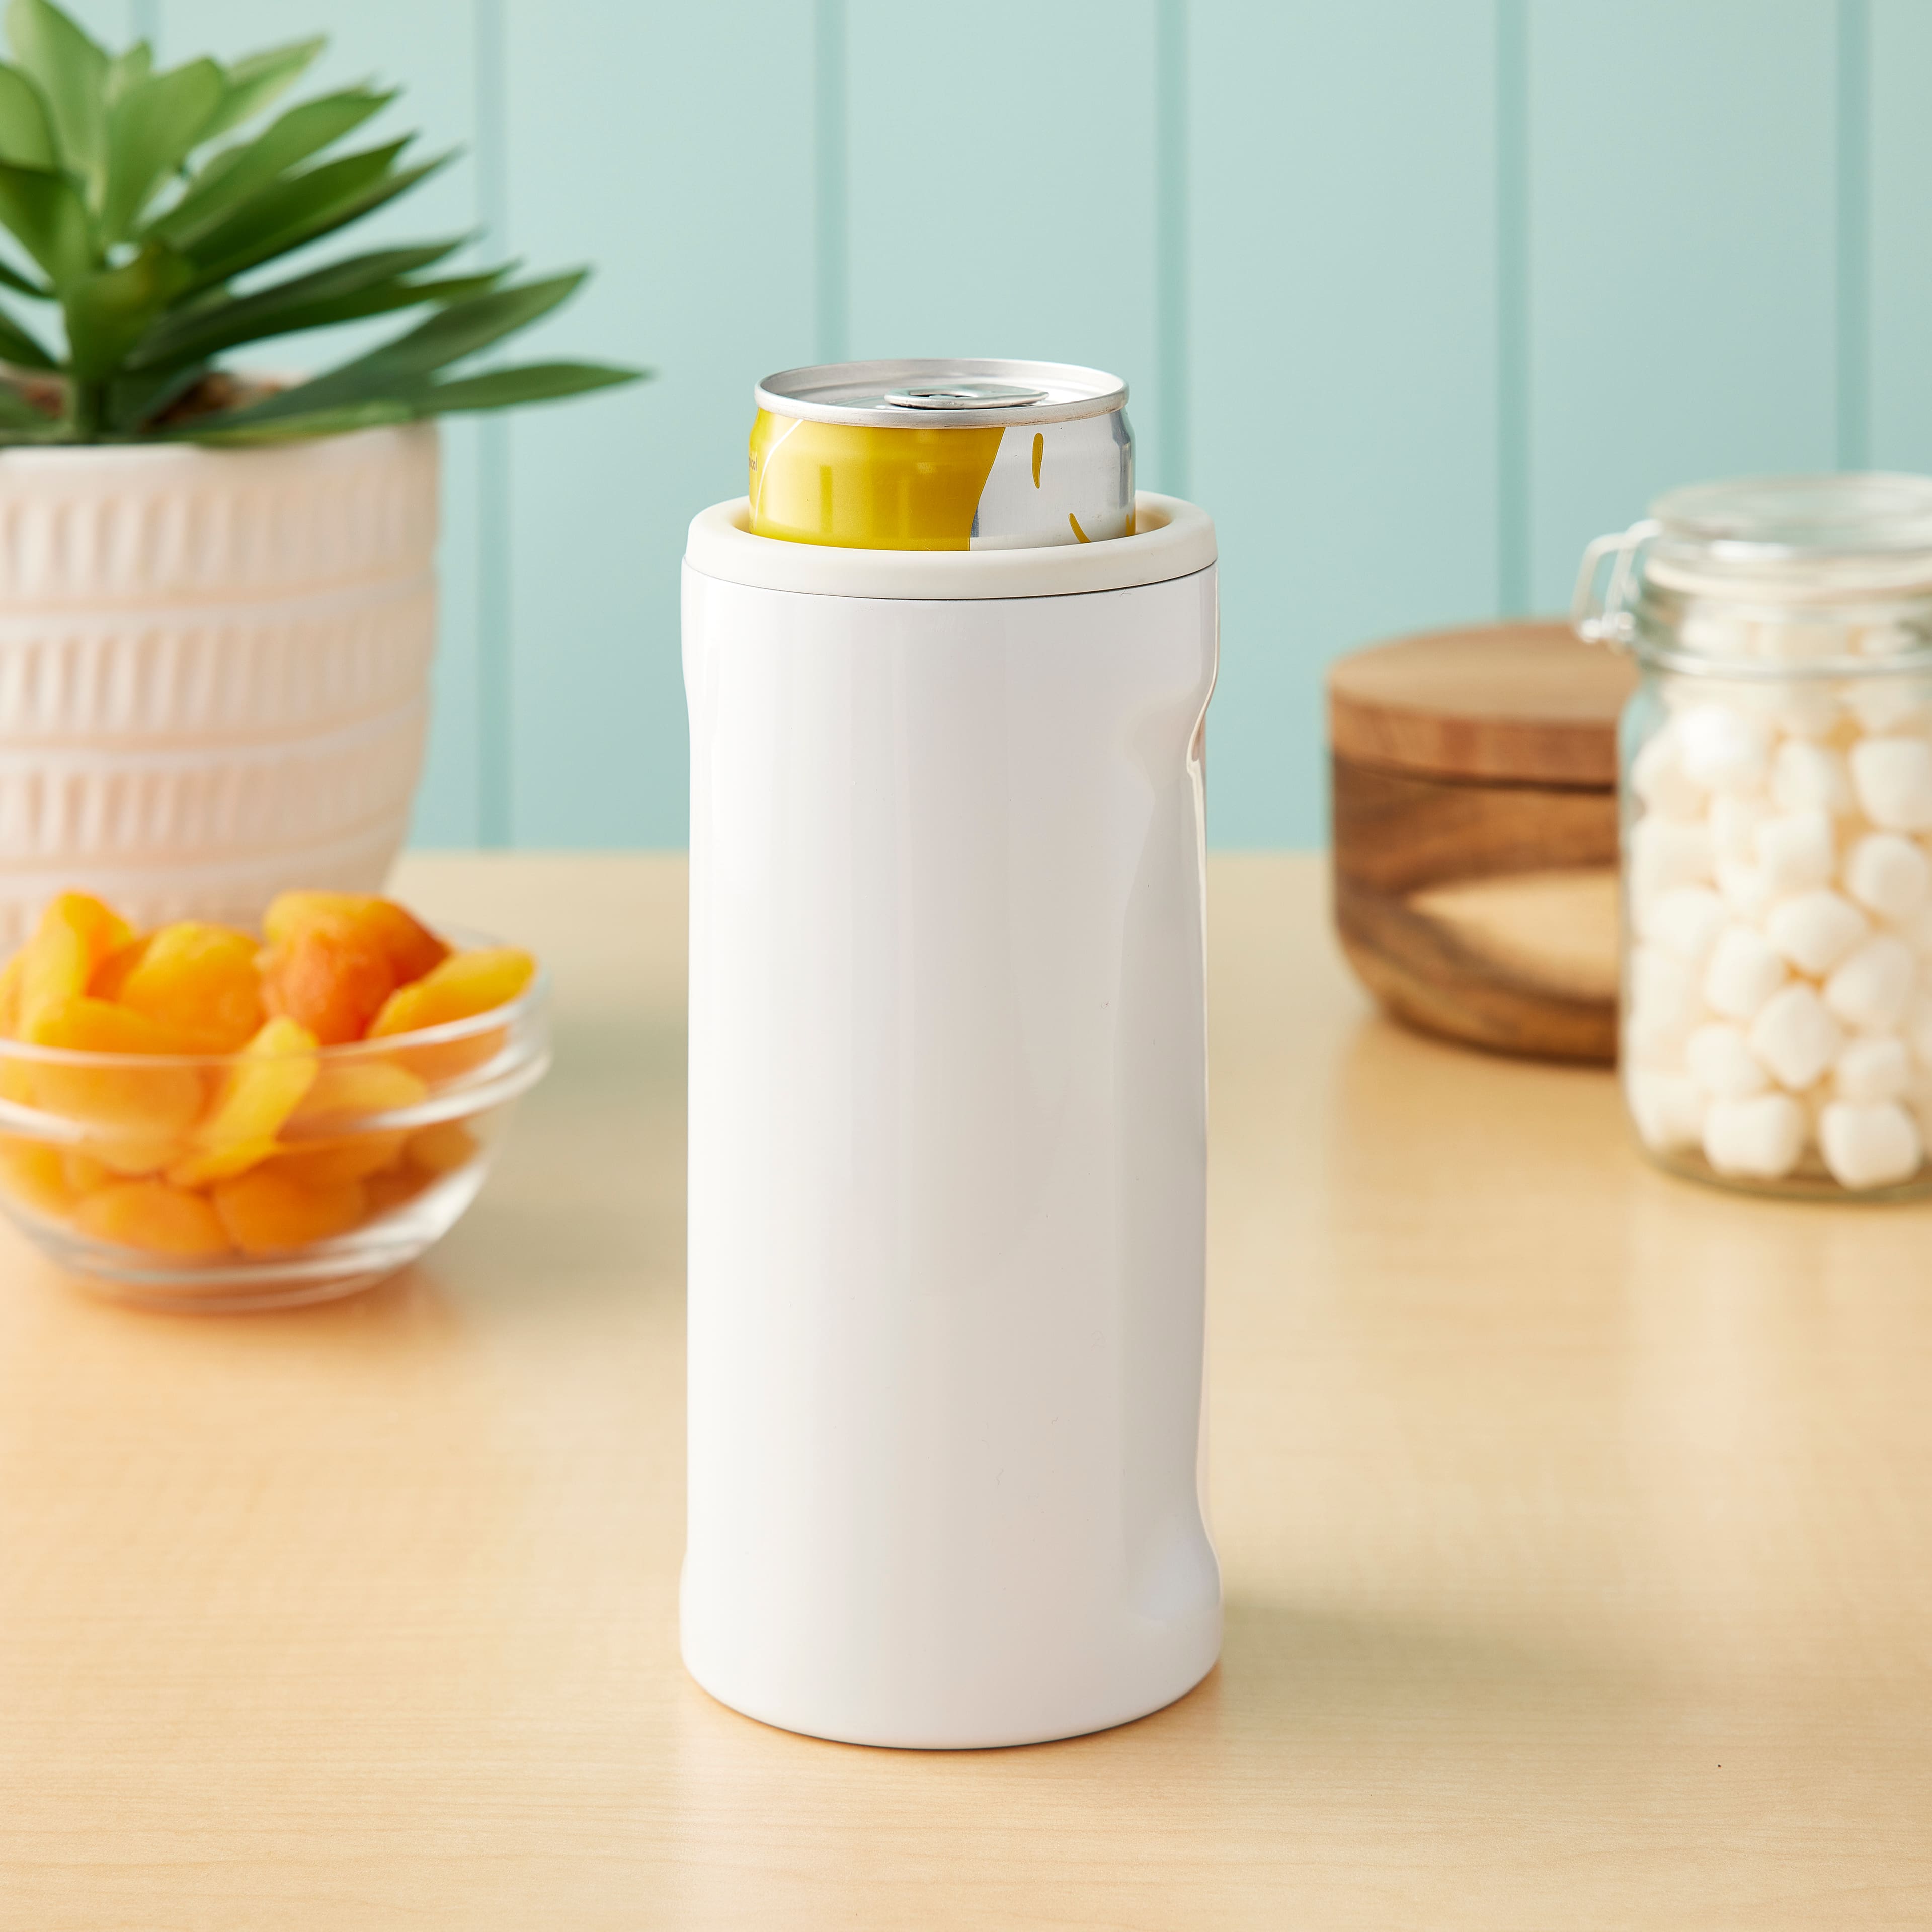 12oz. Stainless Steel Slim Can Cooler by Celebrate It&#x2122;